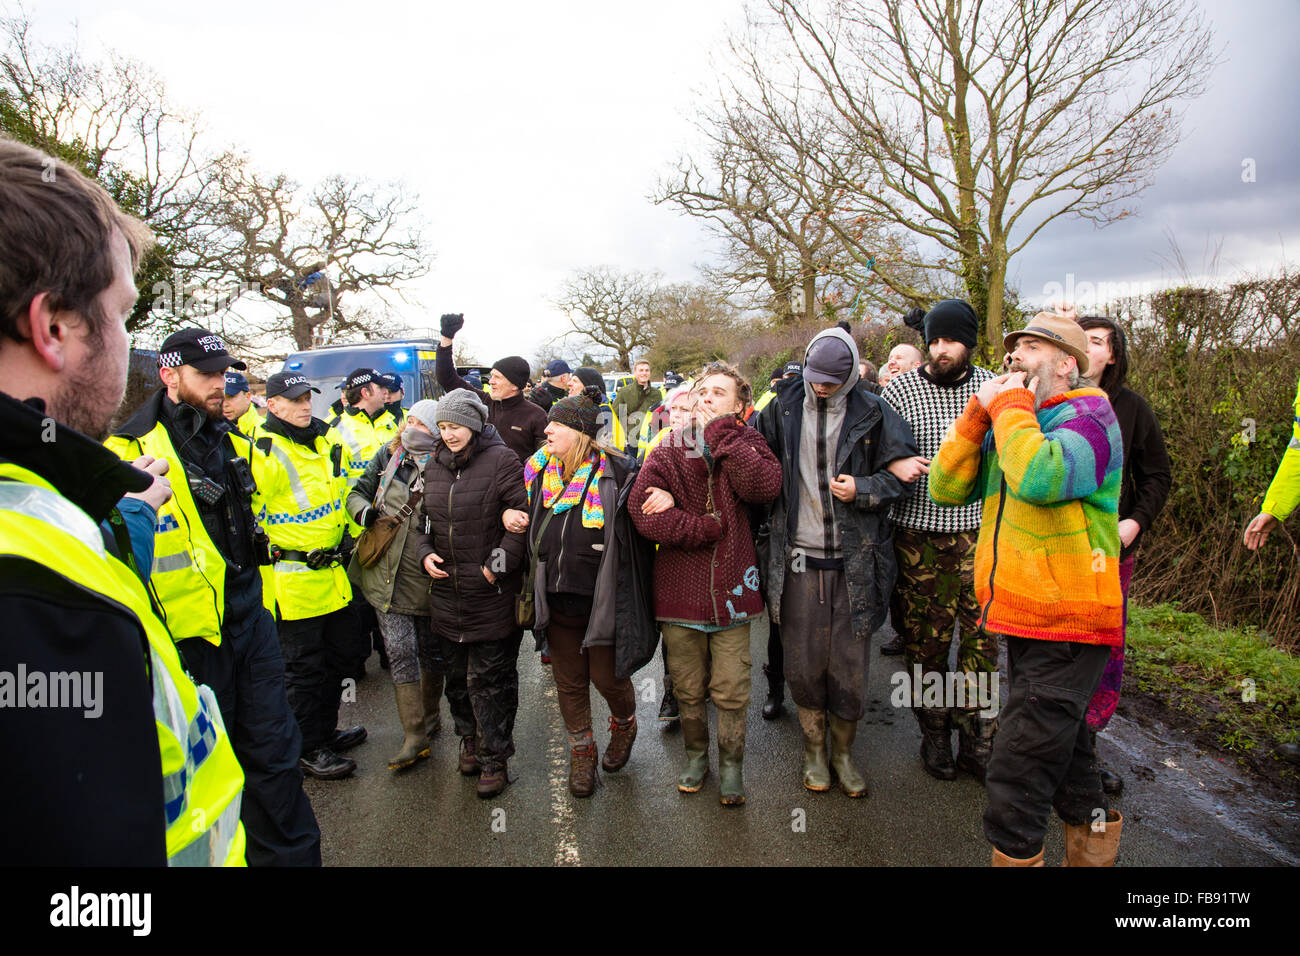 Upton, Cheshire. 12th Jan, 2016. Large numbers of police and bailiffs evicting protestors from the long standing anti fracking camp at Upton  Credit:  Jason Smalley / Alamy Live News Stock Photo